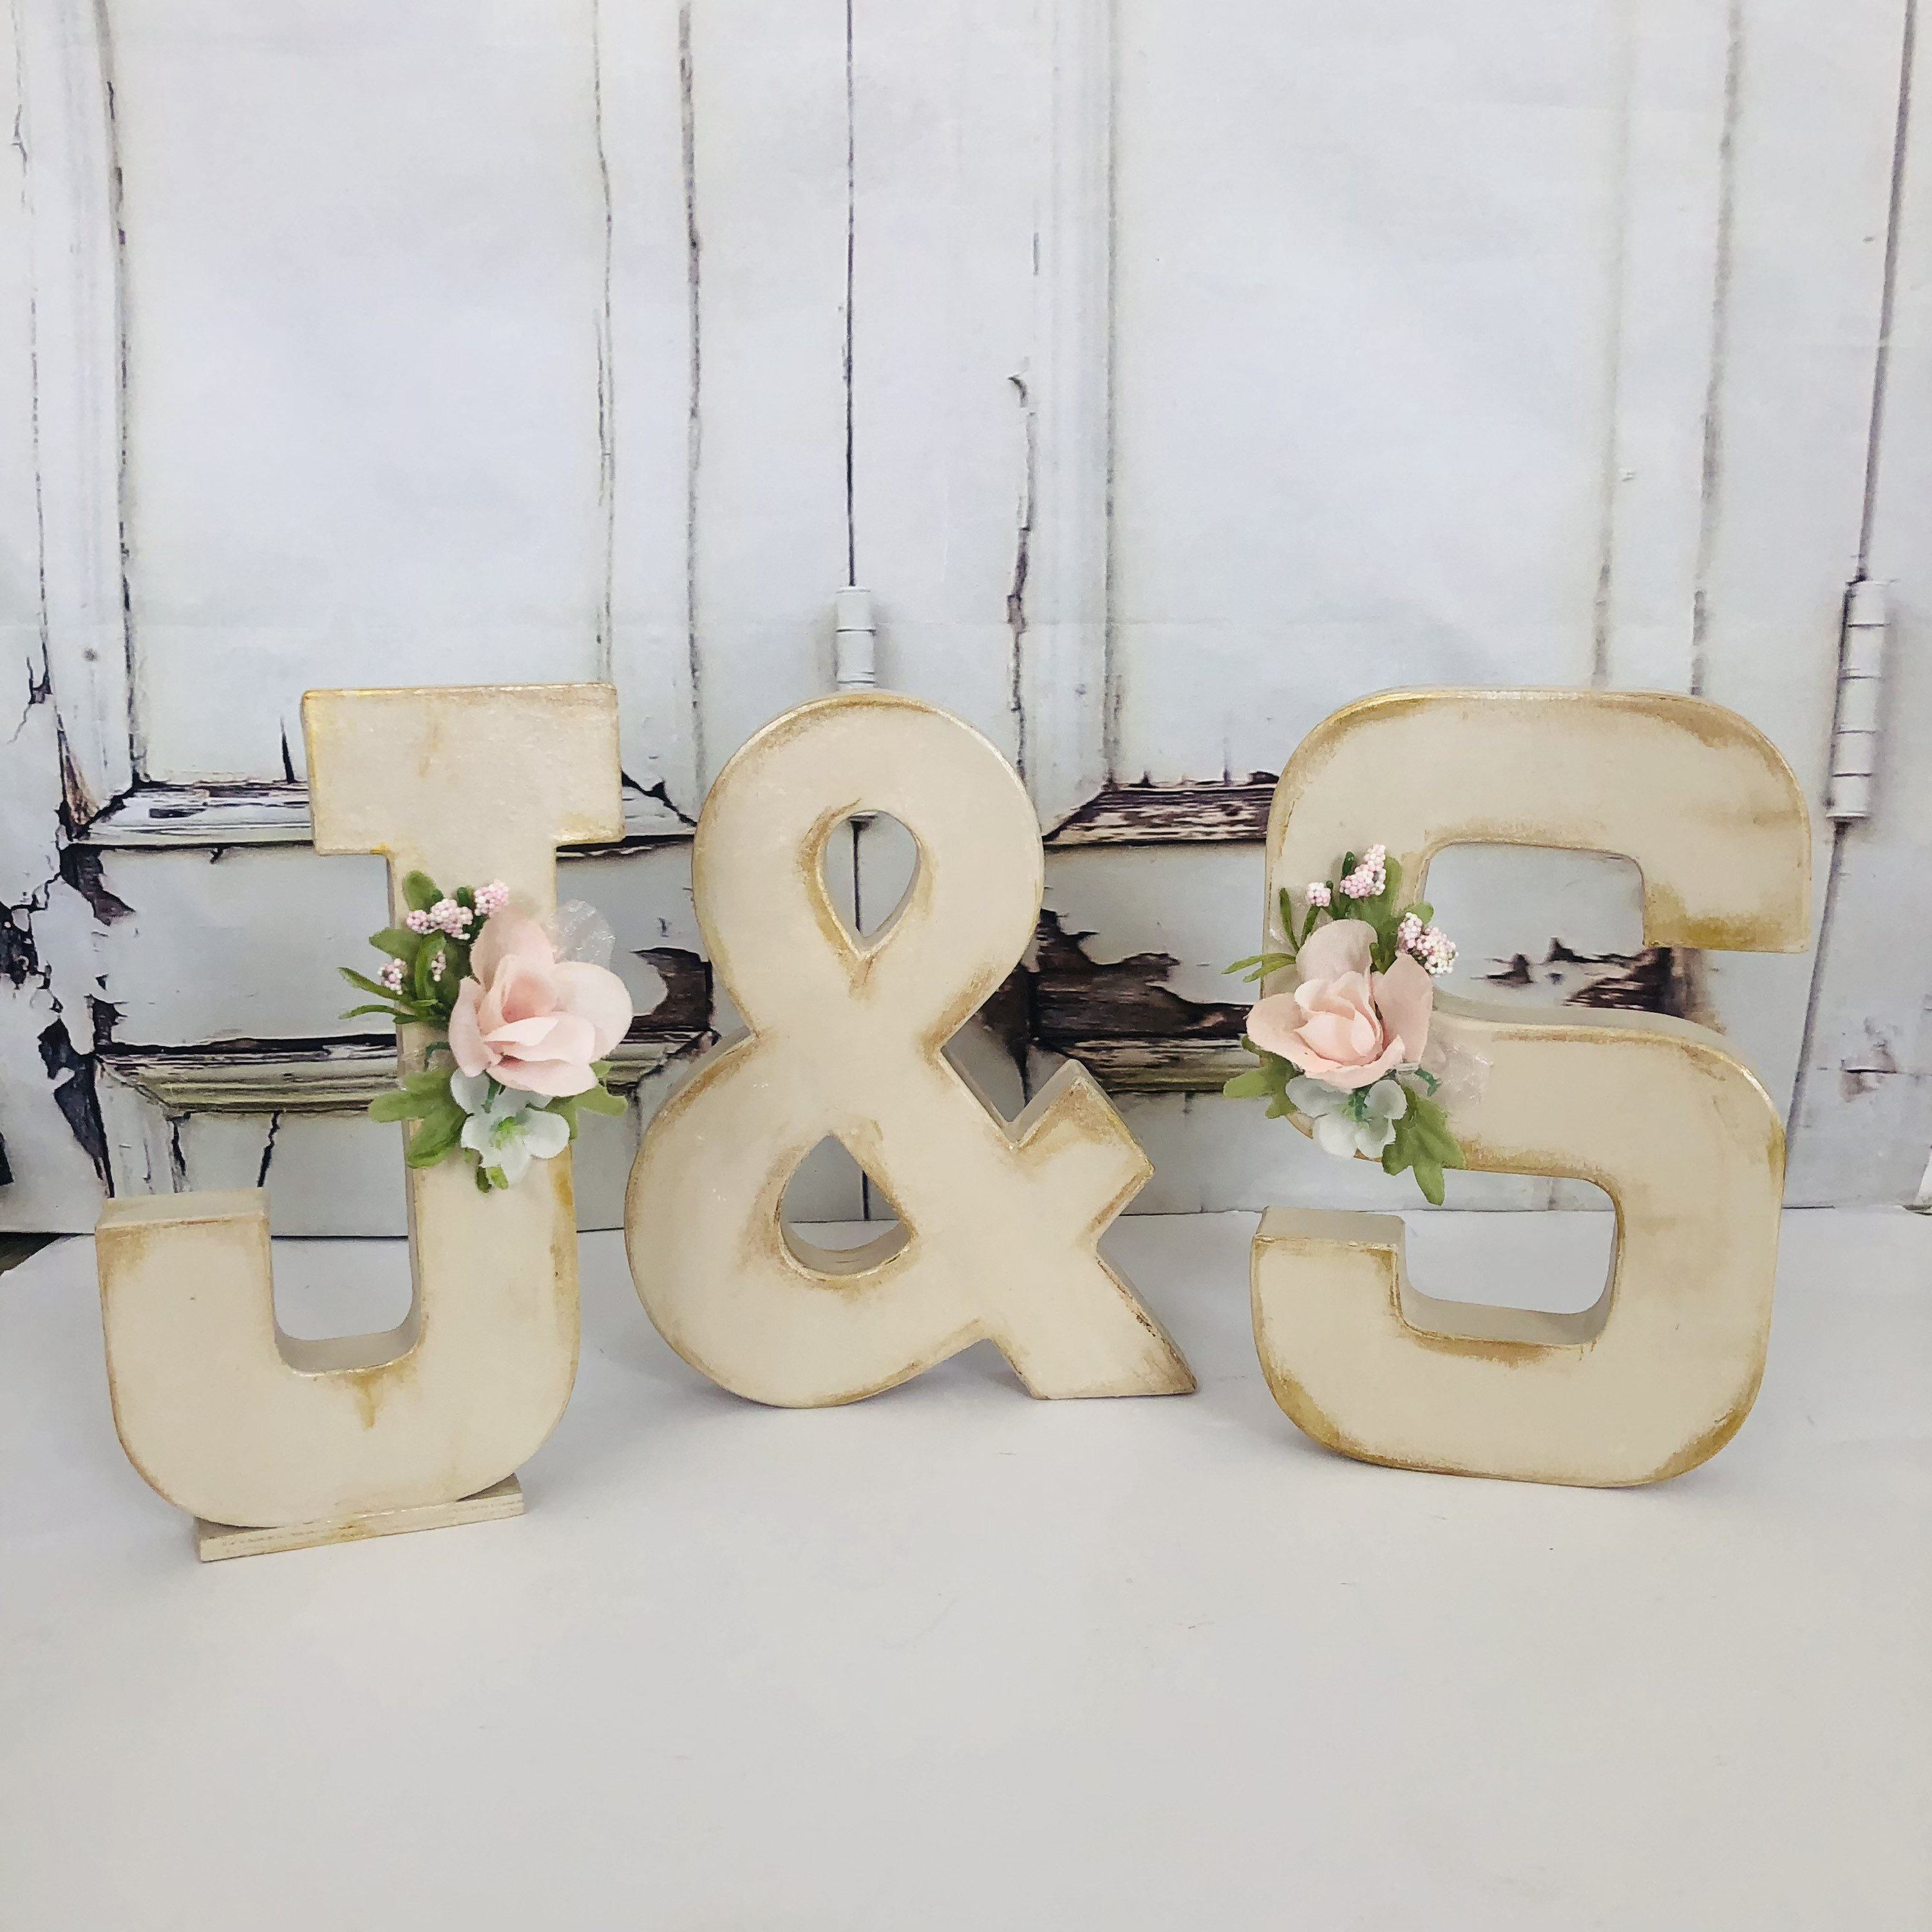  OSALADI 5pcs Wooden Numbers Rustic Wood Address Signs Large  Letters Cardboard Letters Paper Mache Numbers Number 1 Sign Wedding  Centerpieces for Tables Home Accessory Blank Wooden Door : Tools & Home